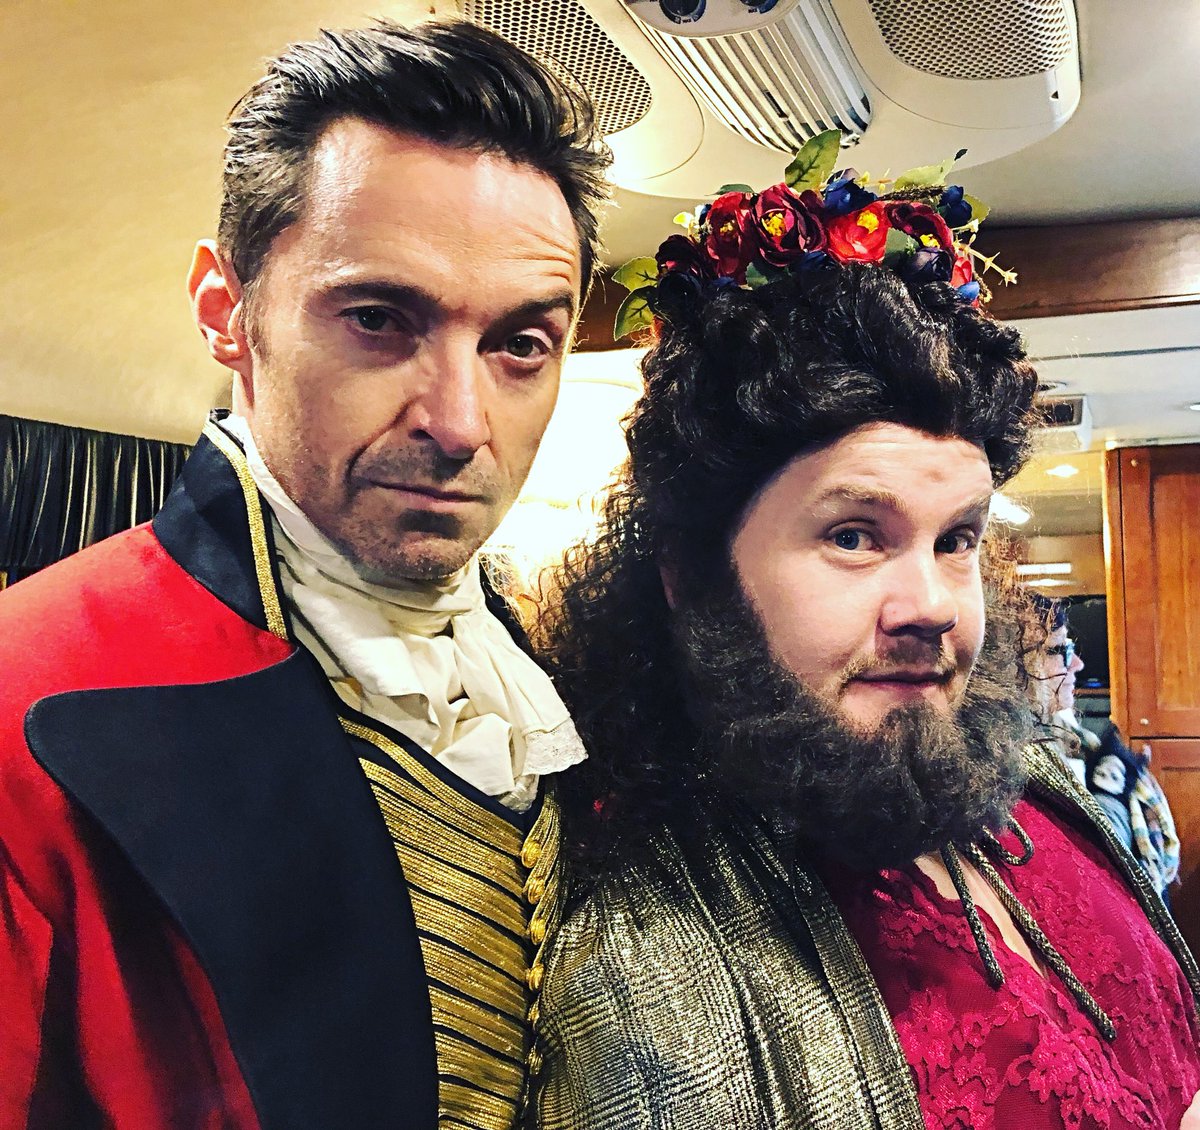 I just can’t!!!! The #beardedlady as played by @JKCorden . @GreatestShowman https://t.co/KoSU3yeCNi